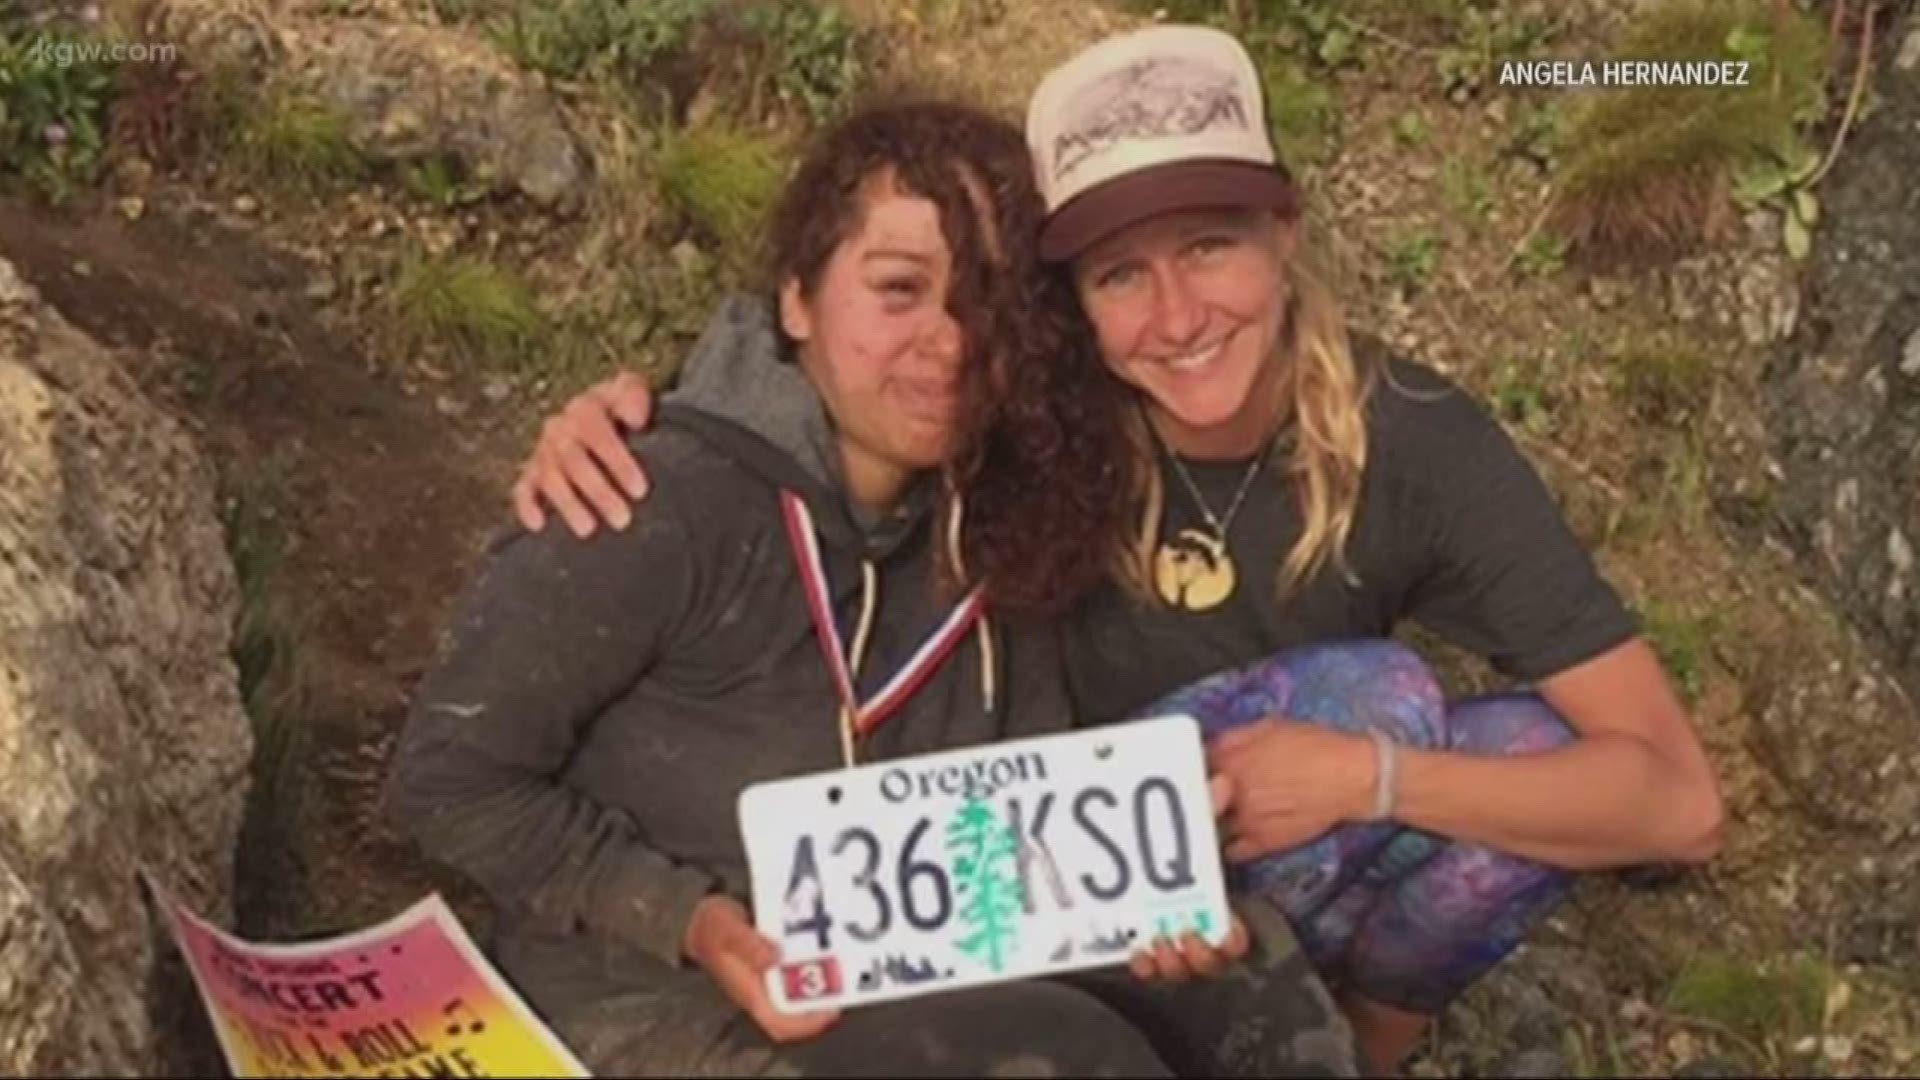 A Portland woman shares harrowing details about her fight for survival after her car plummeted over a California cliff.